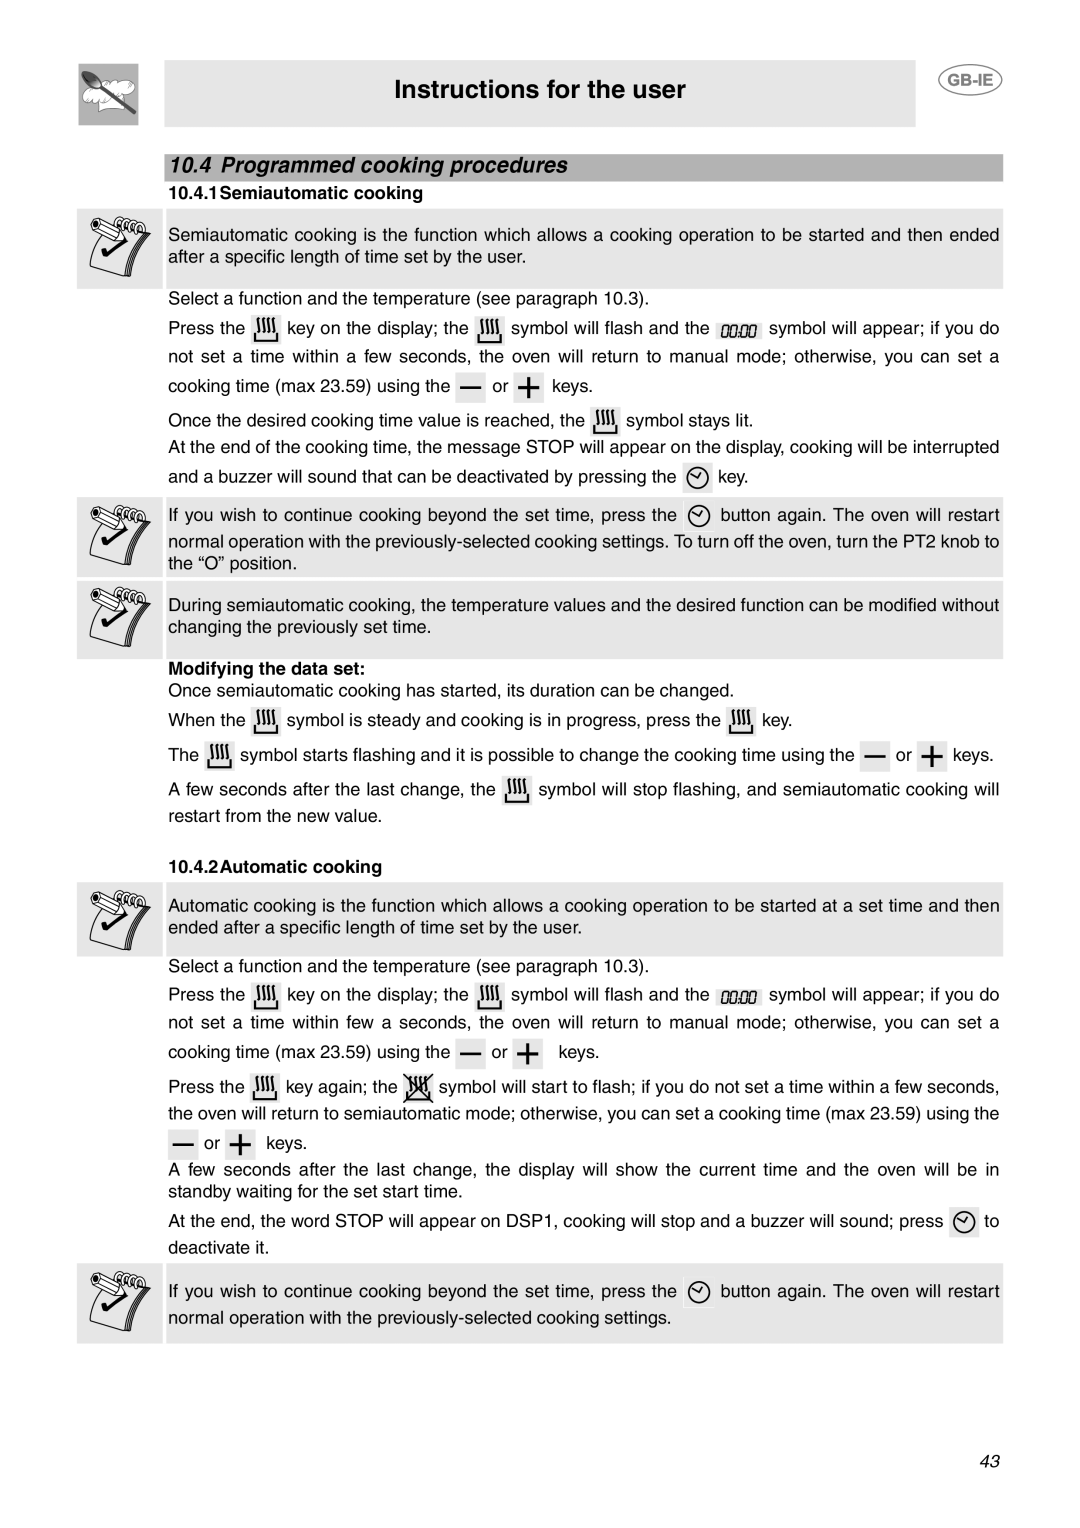 Smeg CE92IPX Programmed cooking procedures, Instructions for the user, 10.4.1Semiautomatic cooking, Modifying the data set 